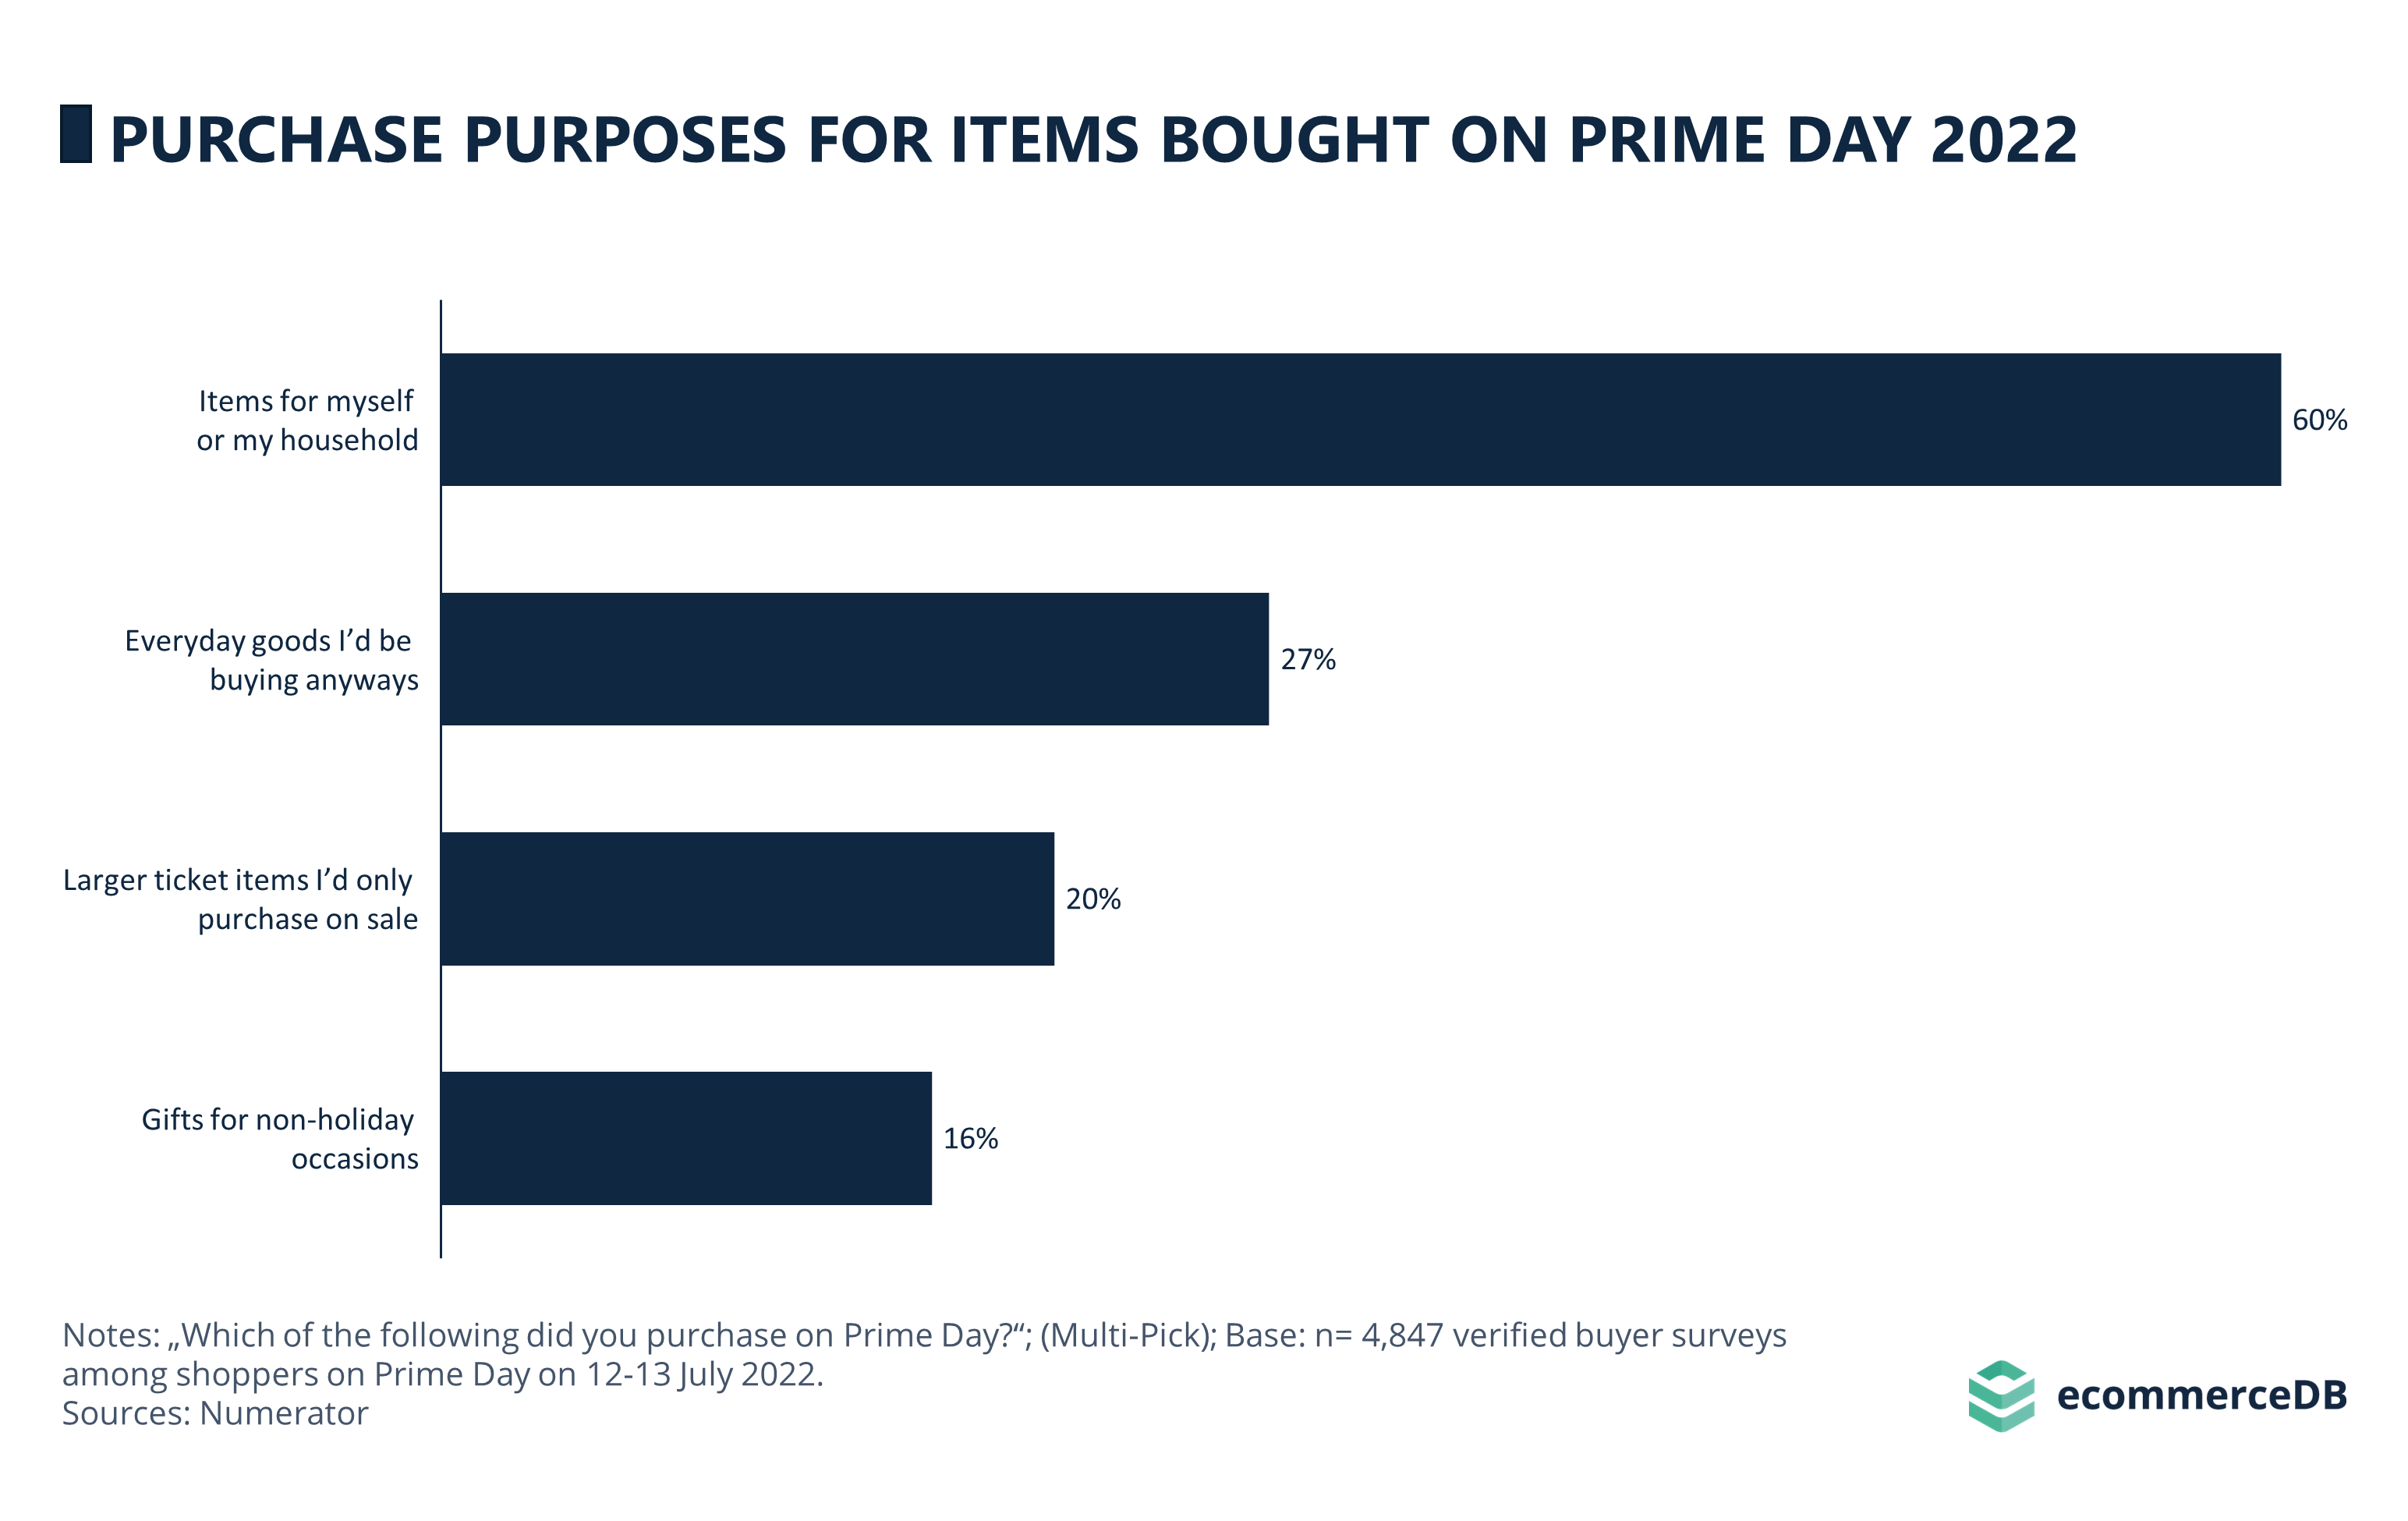 Purchase Purposes for Items Bought on Prime Day 2022